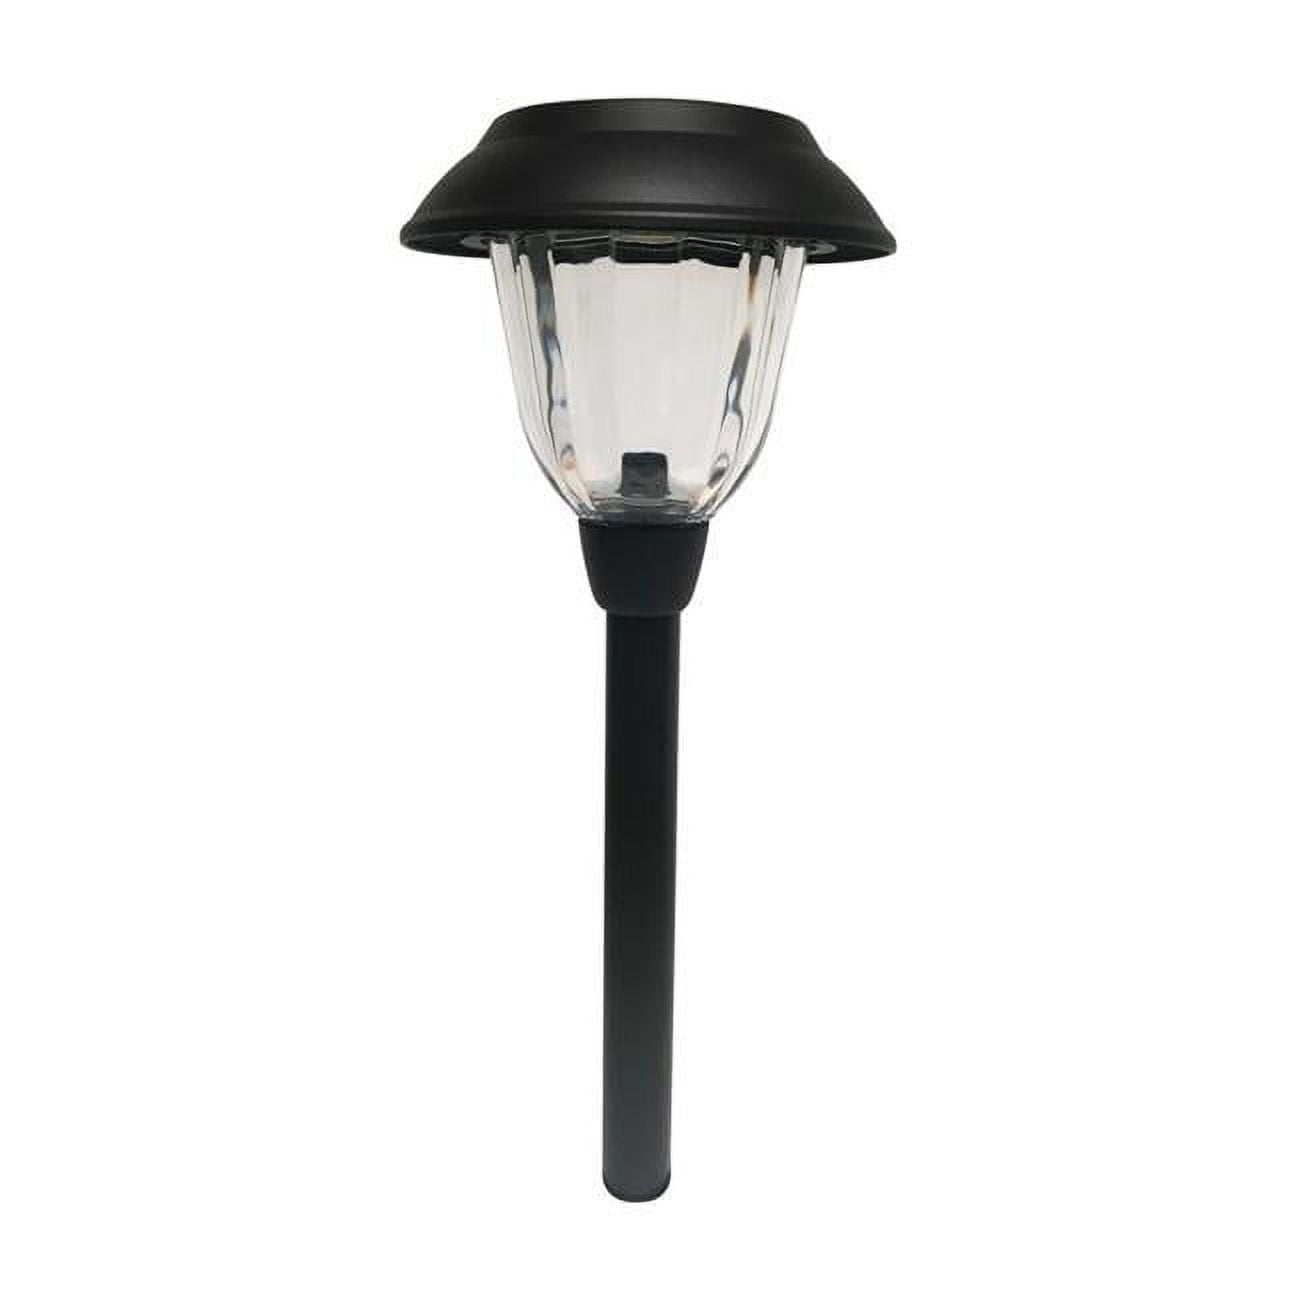 3908522 Bronze Solar Powered Led Pathway Light, Pack Of 6